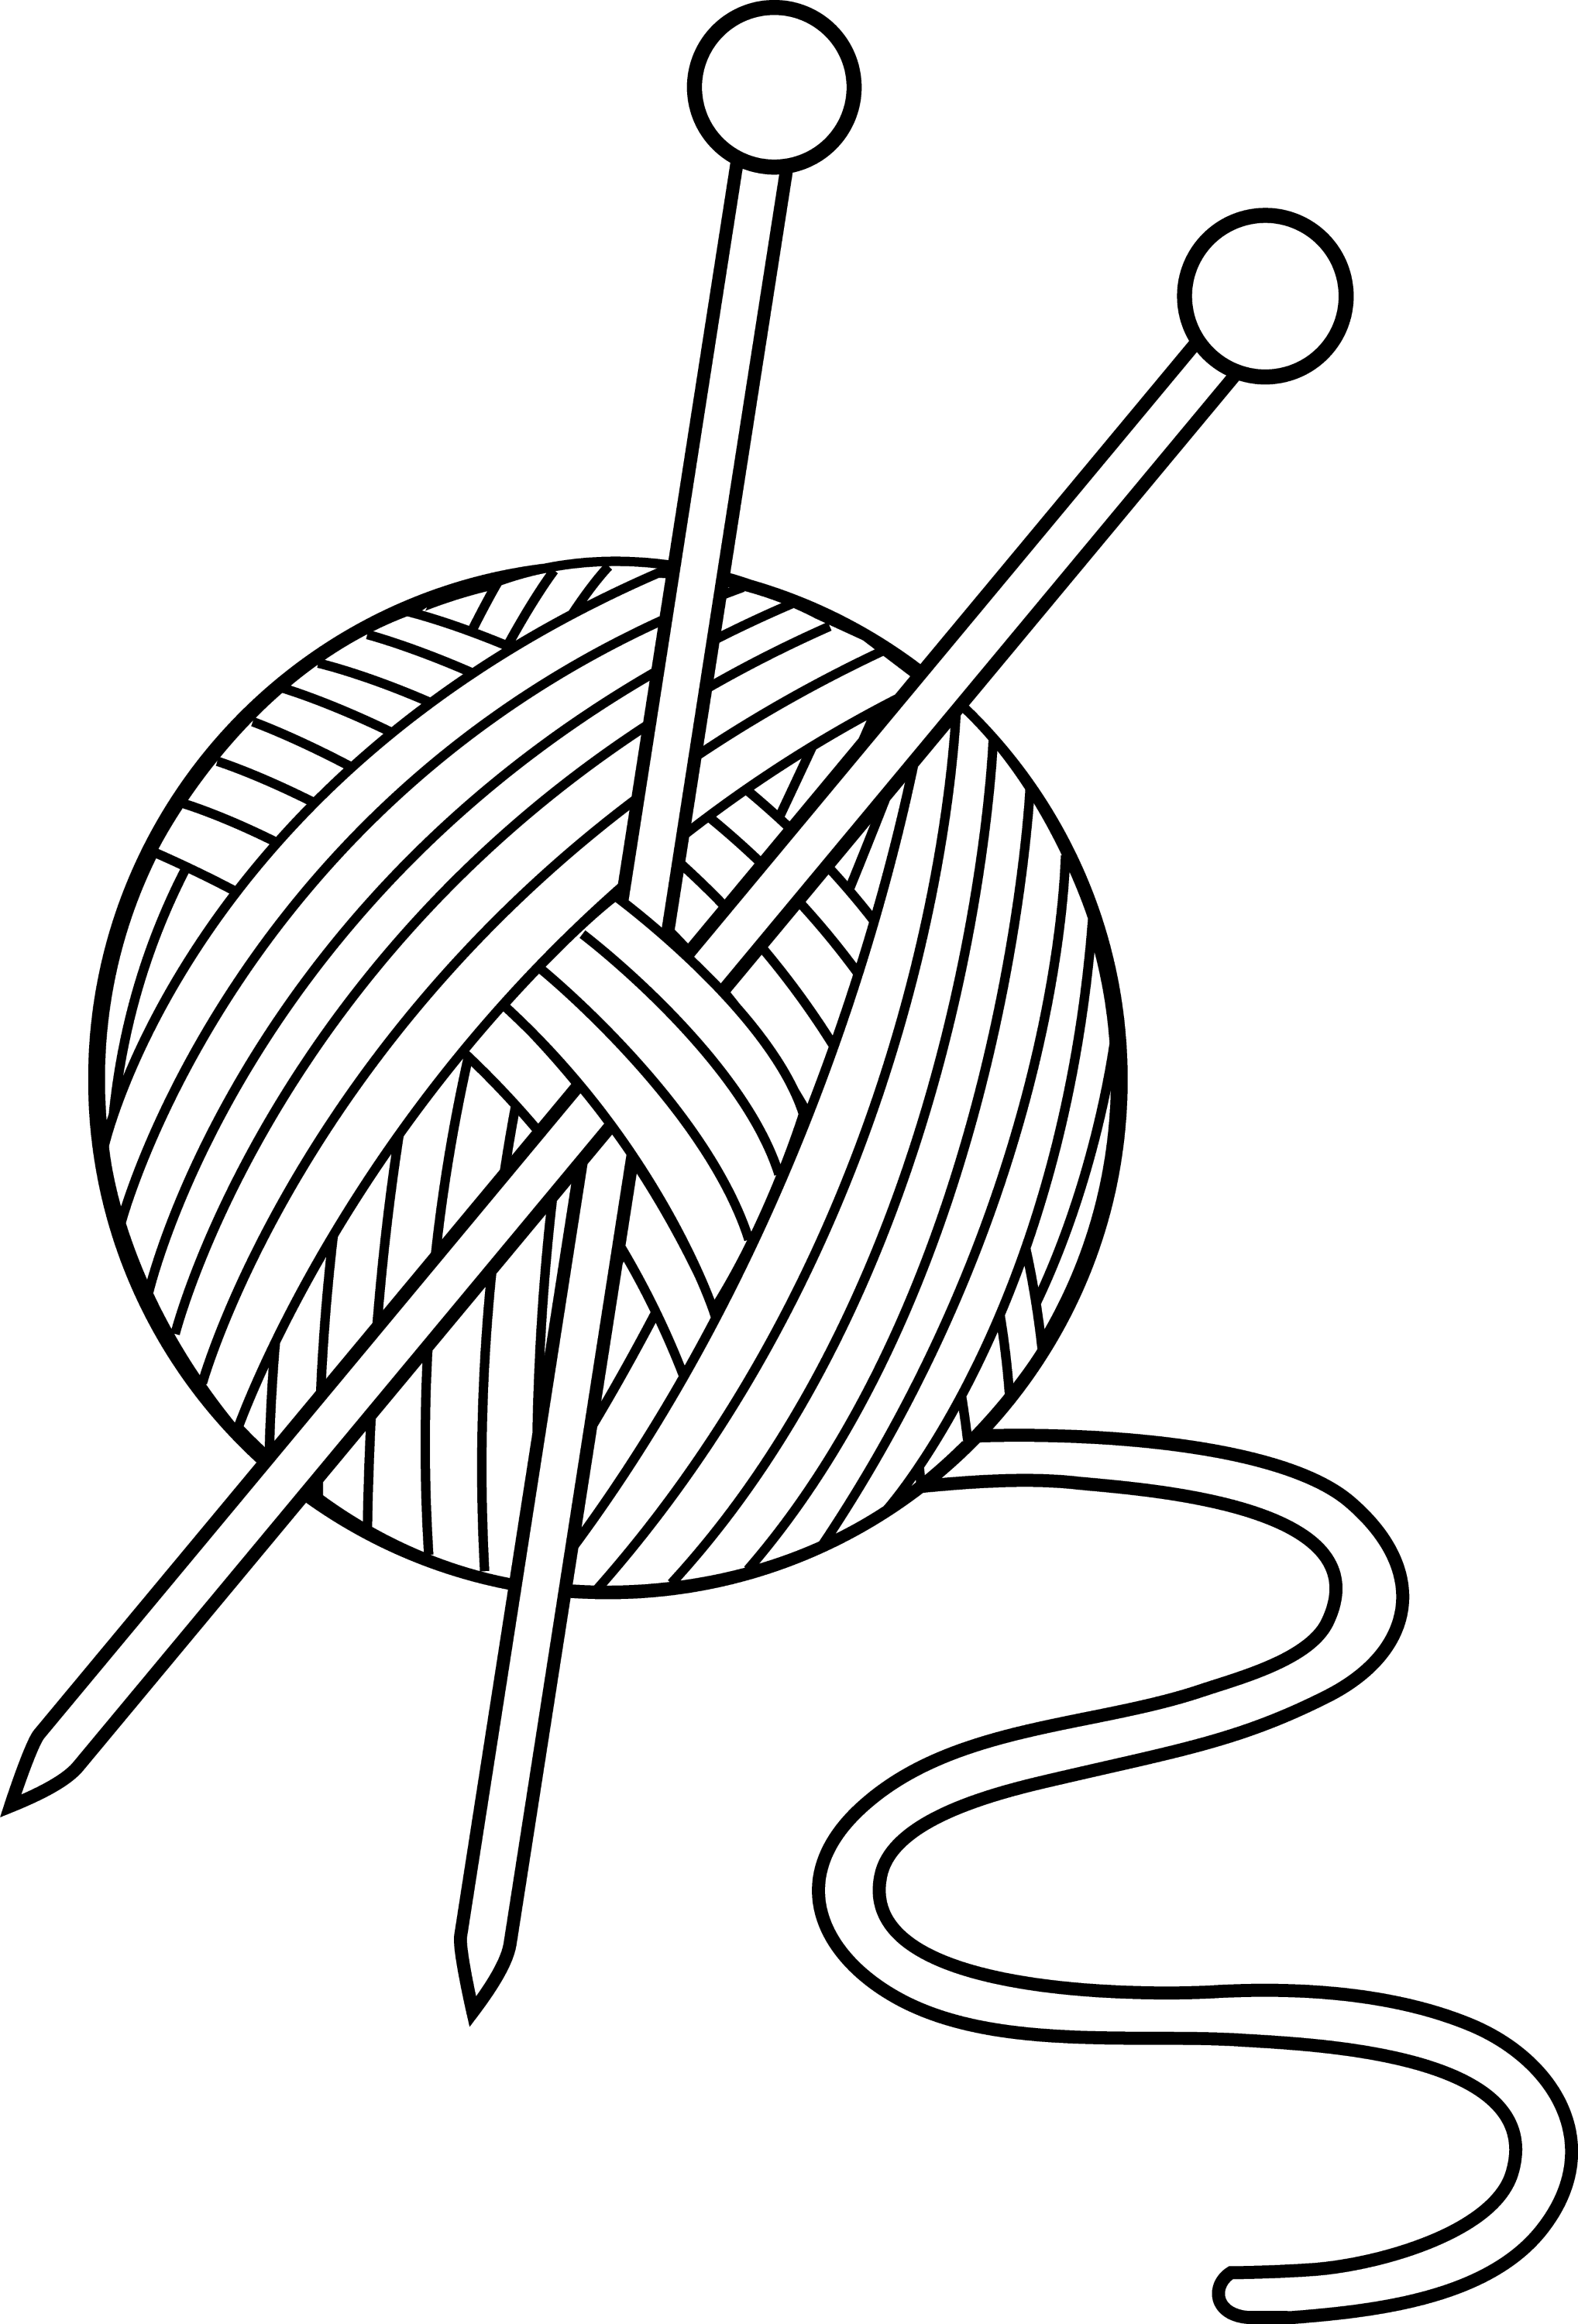 free clipart images yarn - photo #16